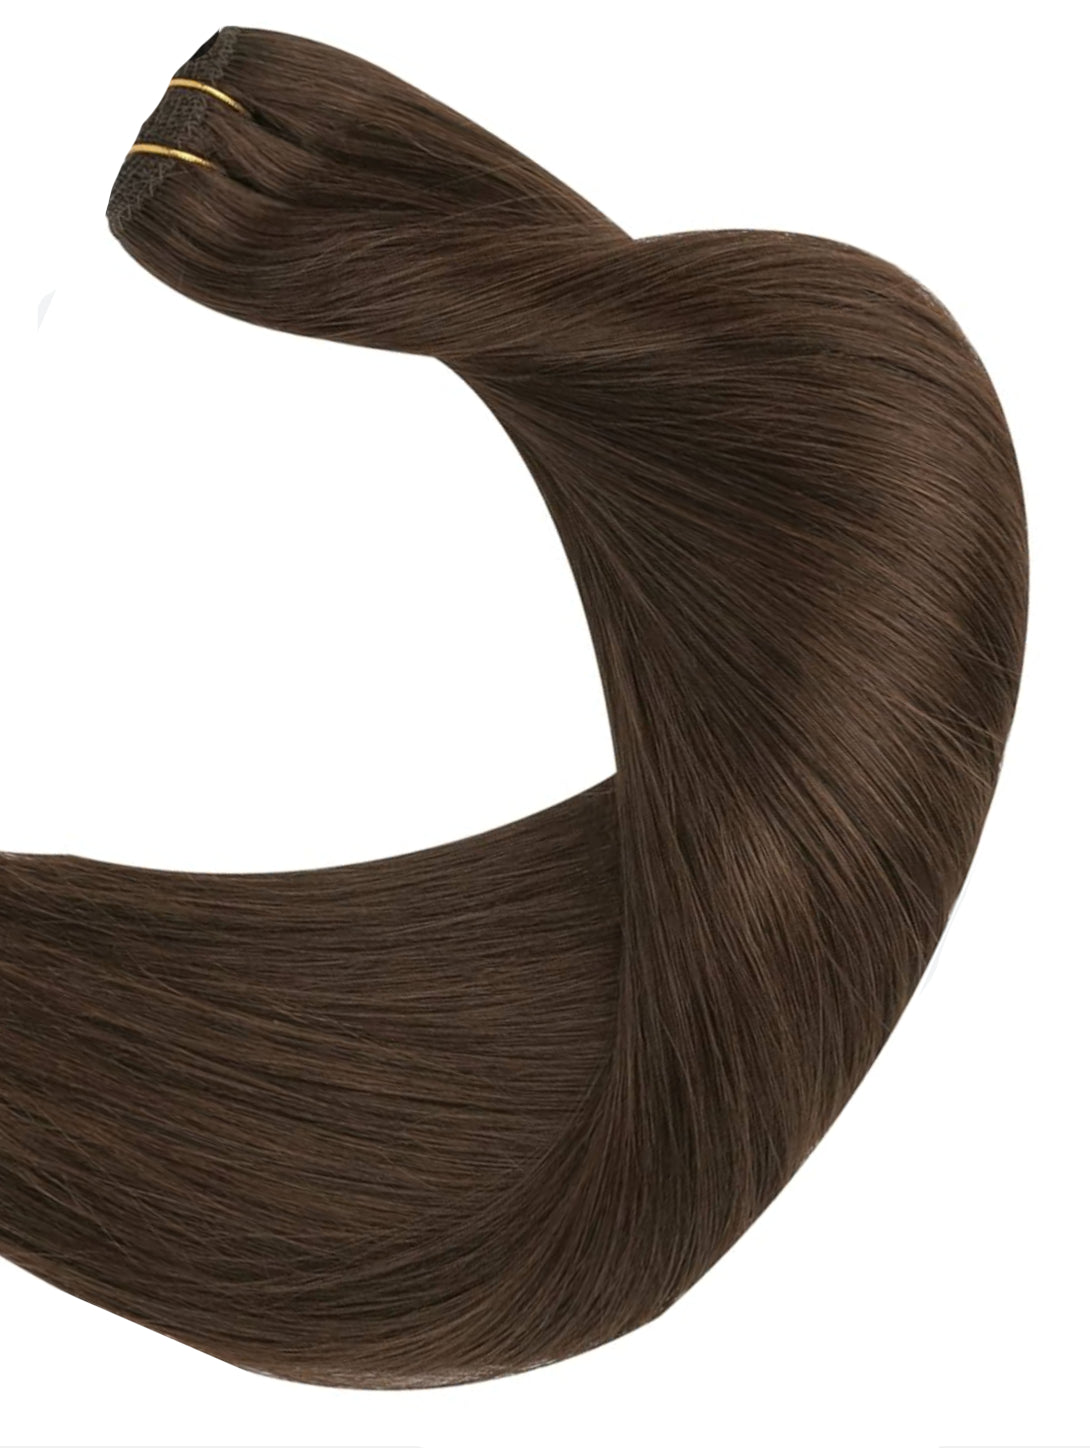 #2 CHOCOLATE BROWN CLIP IN HAIR EXTENSIONS EXTRA THICK 150 GRAMS